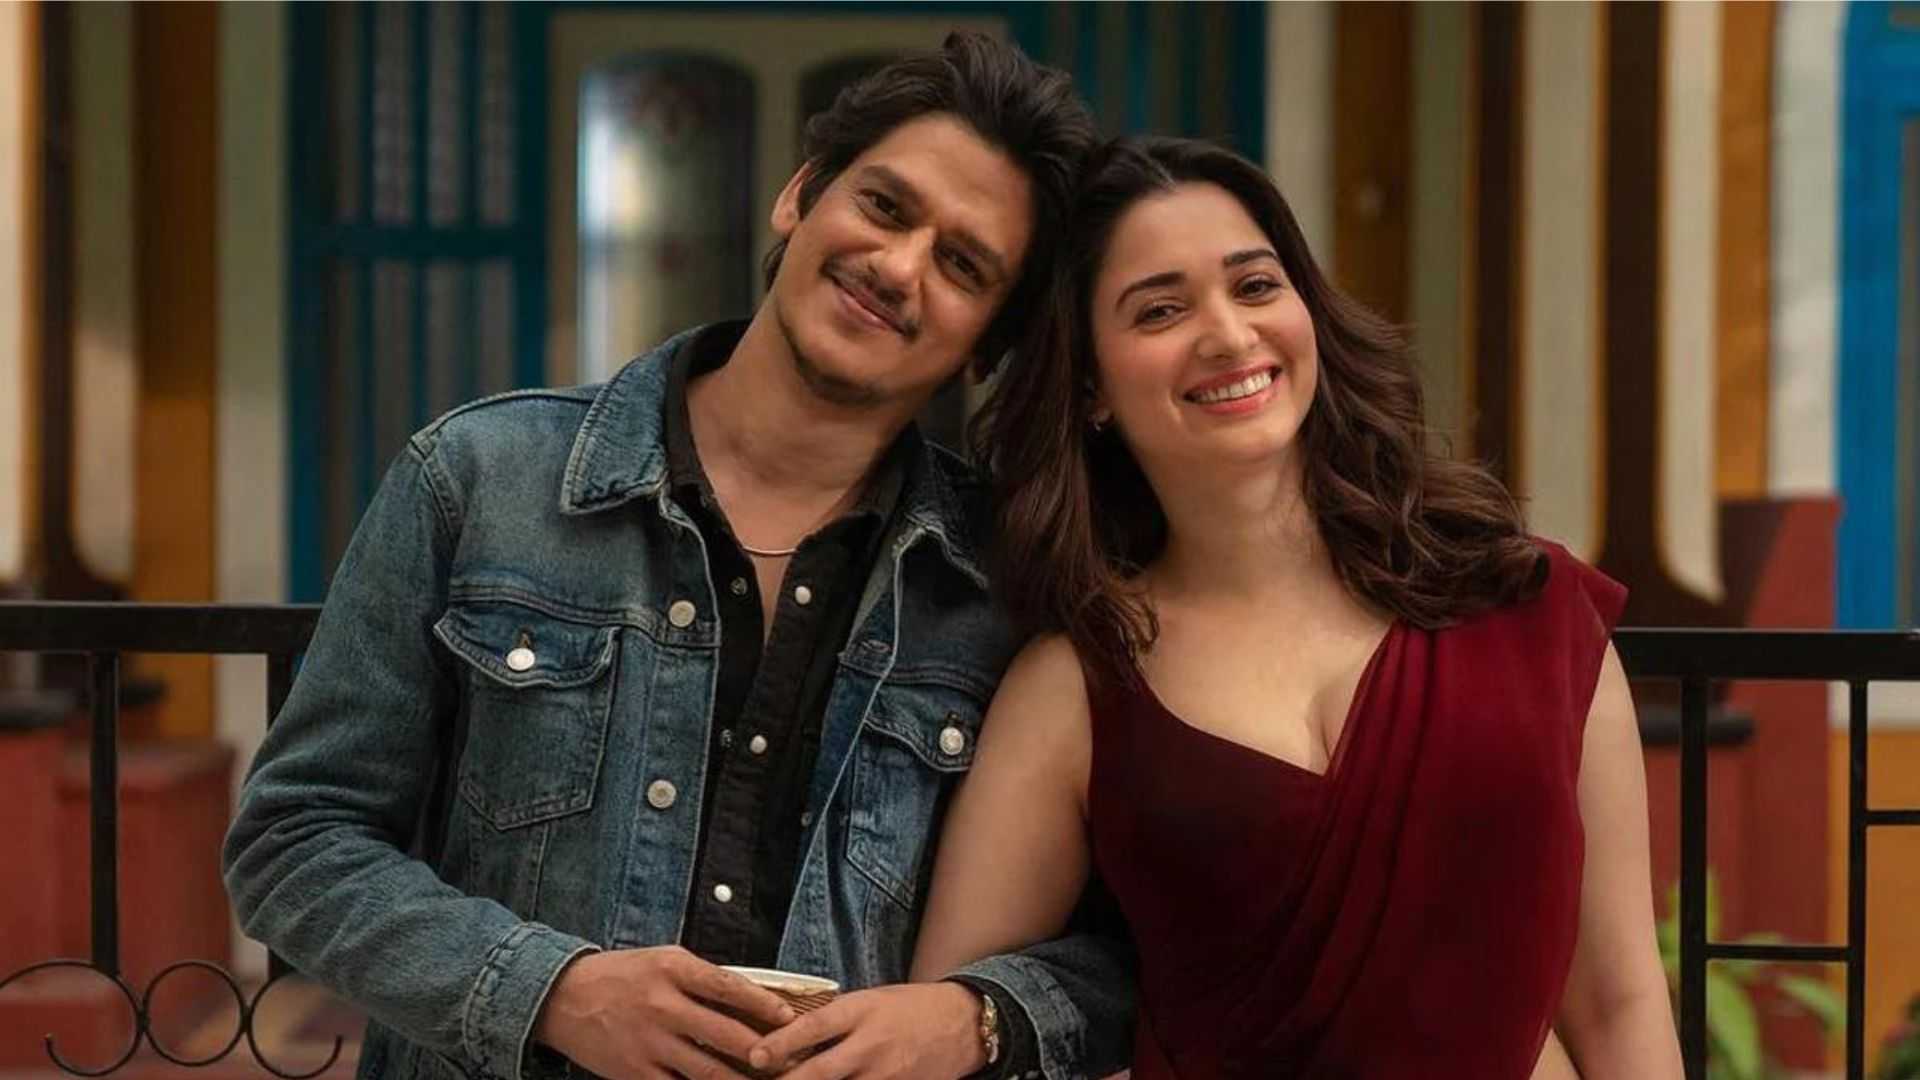 From co-stars to couple: Vijay Varma on romance with Tamannaah after Lust Stories 2